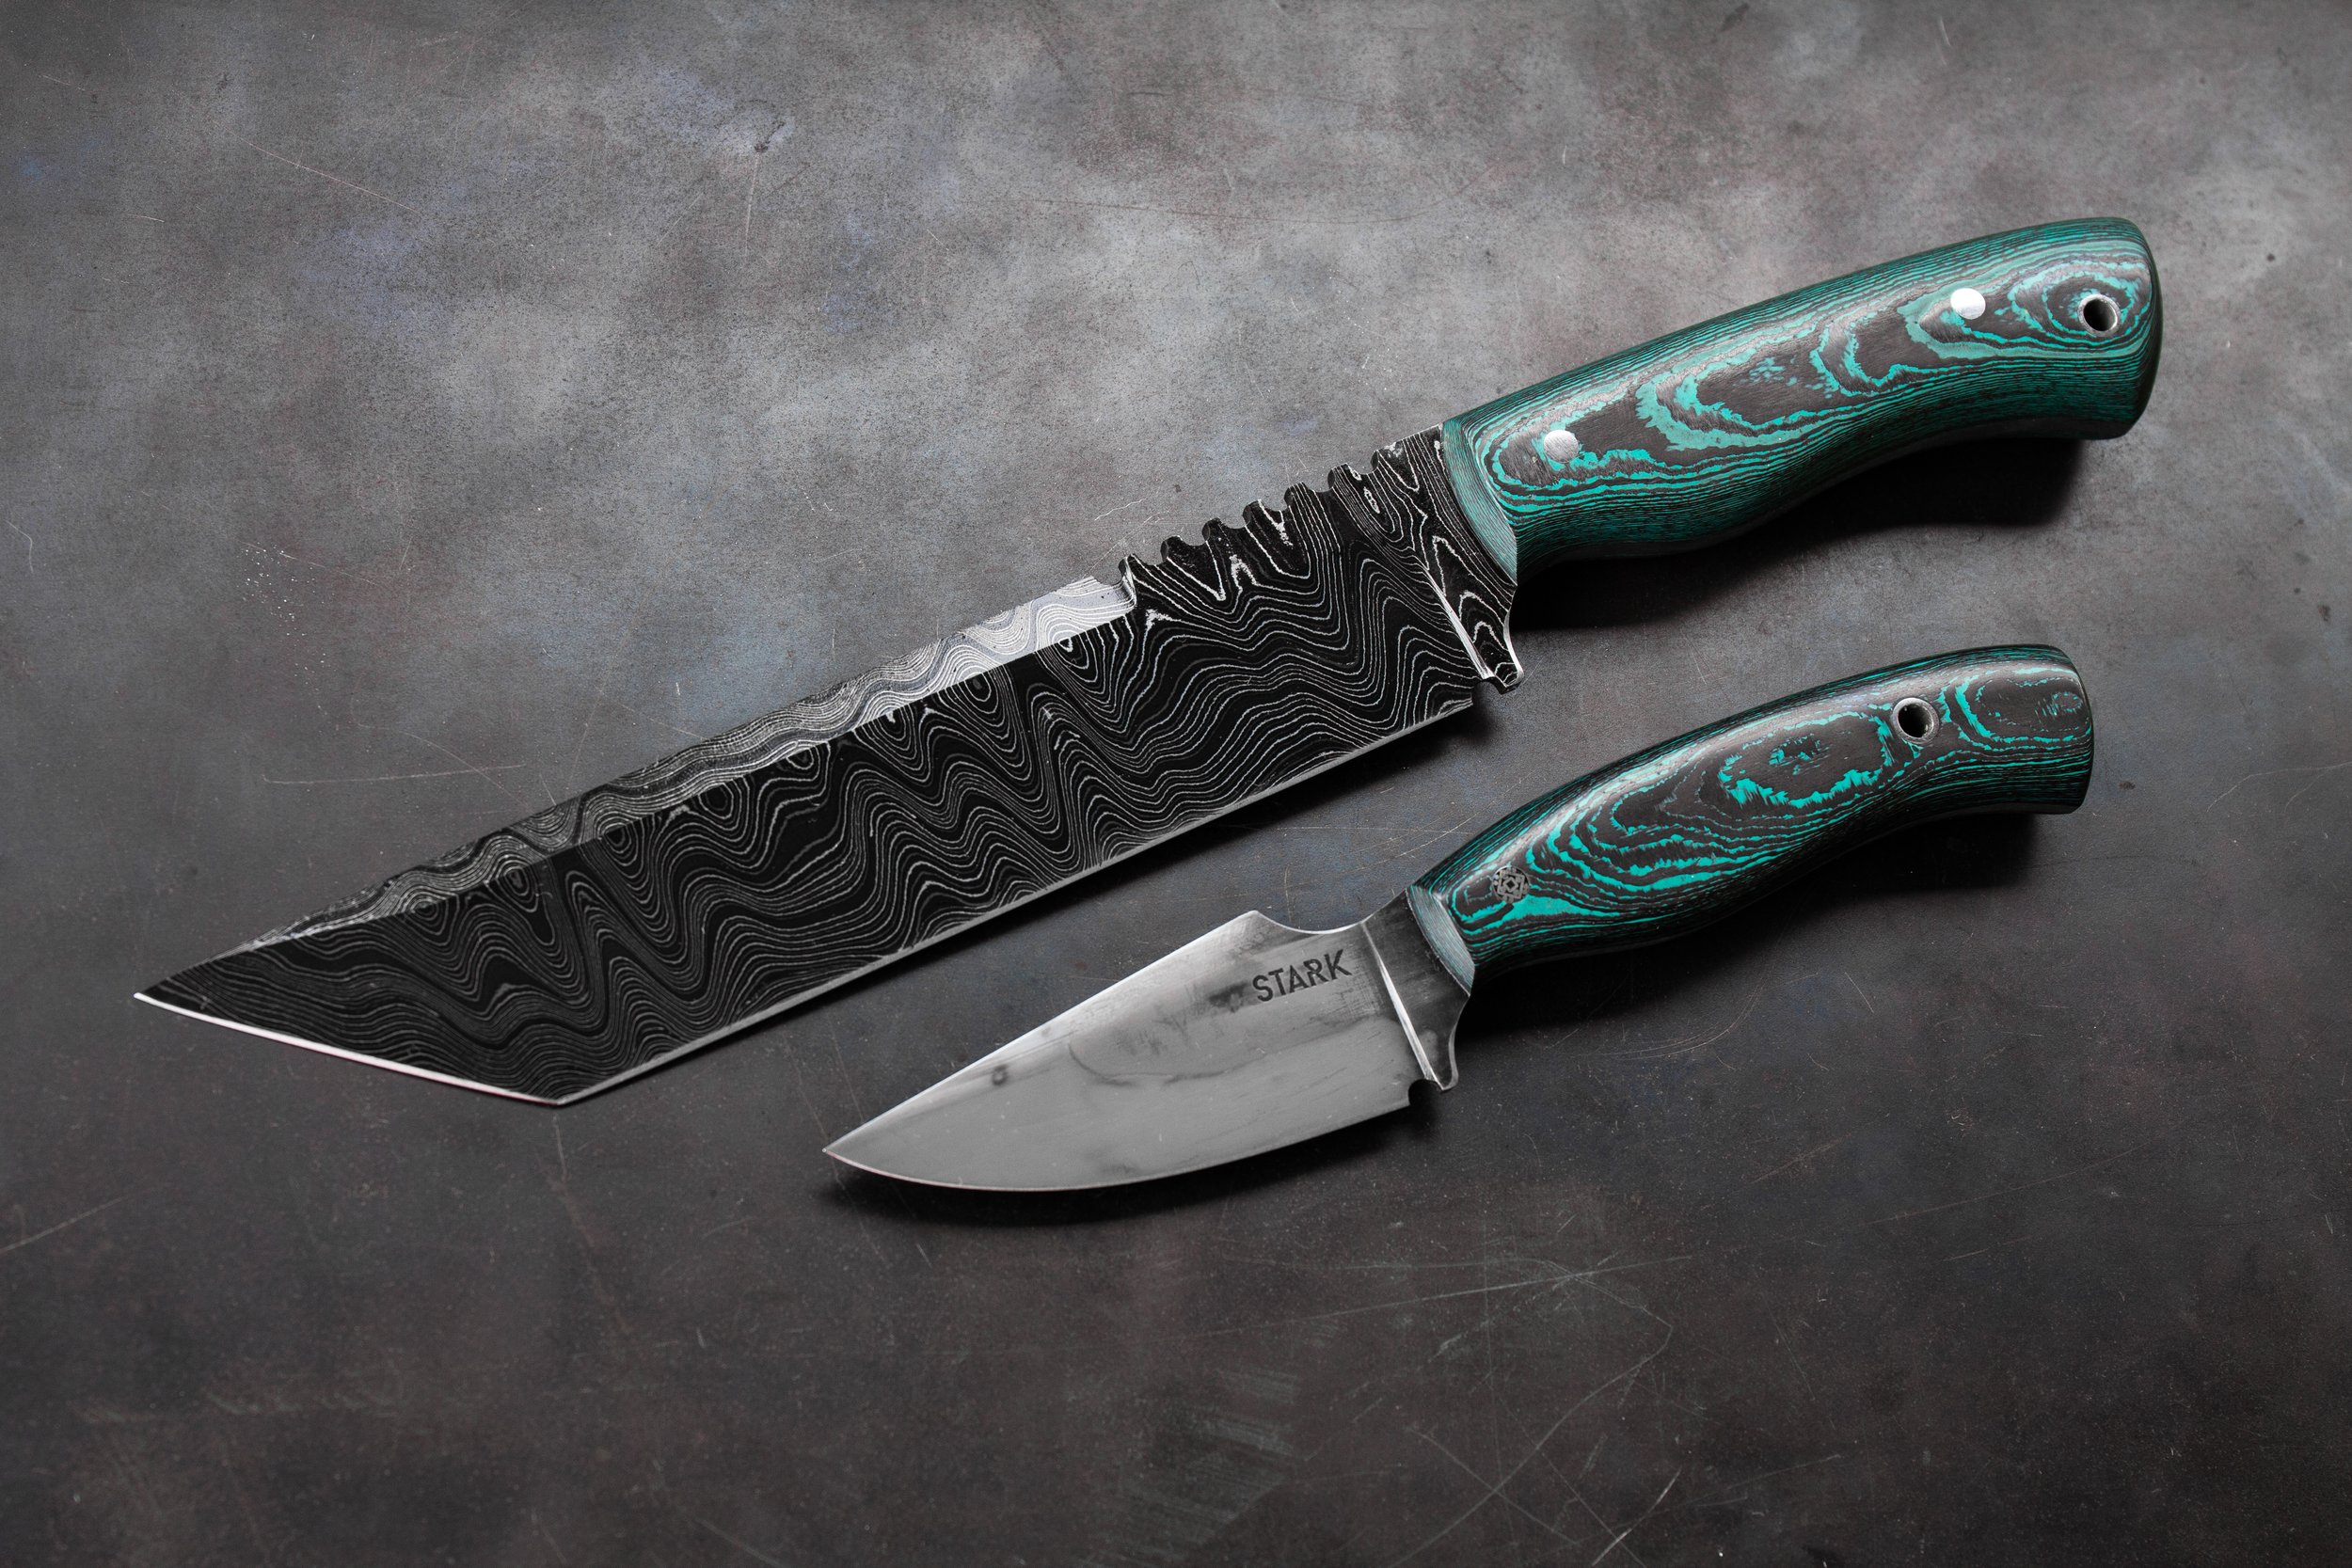 Chef Cleaver CK75 carbon steel is used in the product Handle custom made camouflage pattern epoxy material,